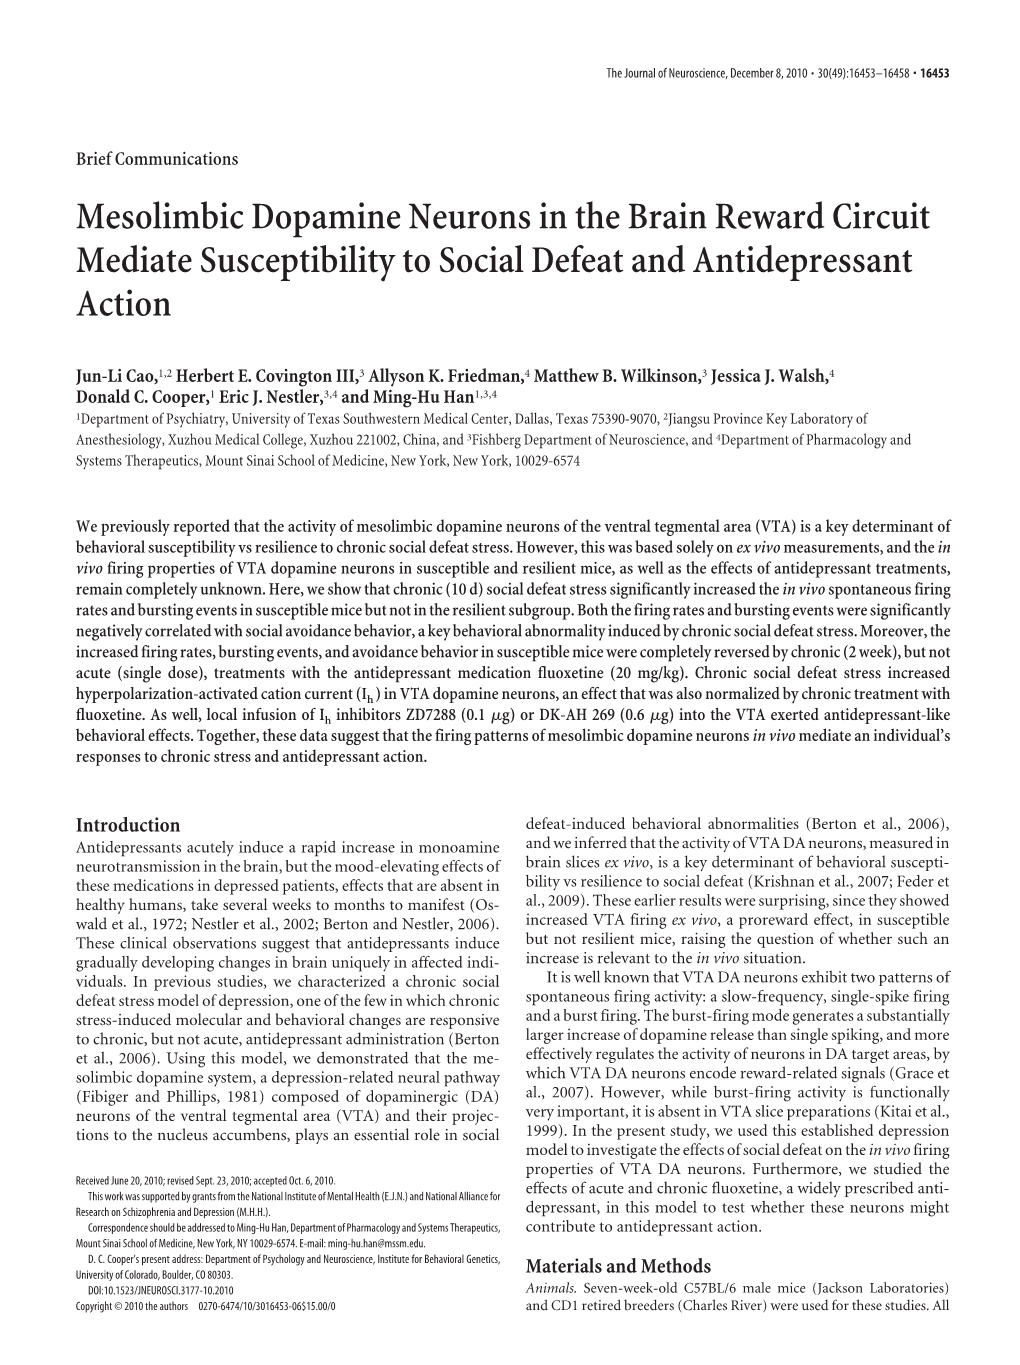 Mesolimbic Dopamine Neurons in the Brain Reward Circuit Mediate Susceptibility to Social Defeat and Antidepressant Action